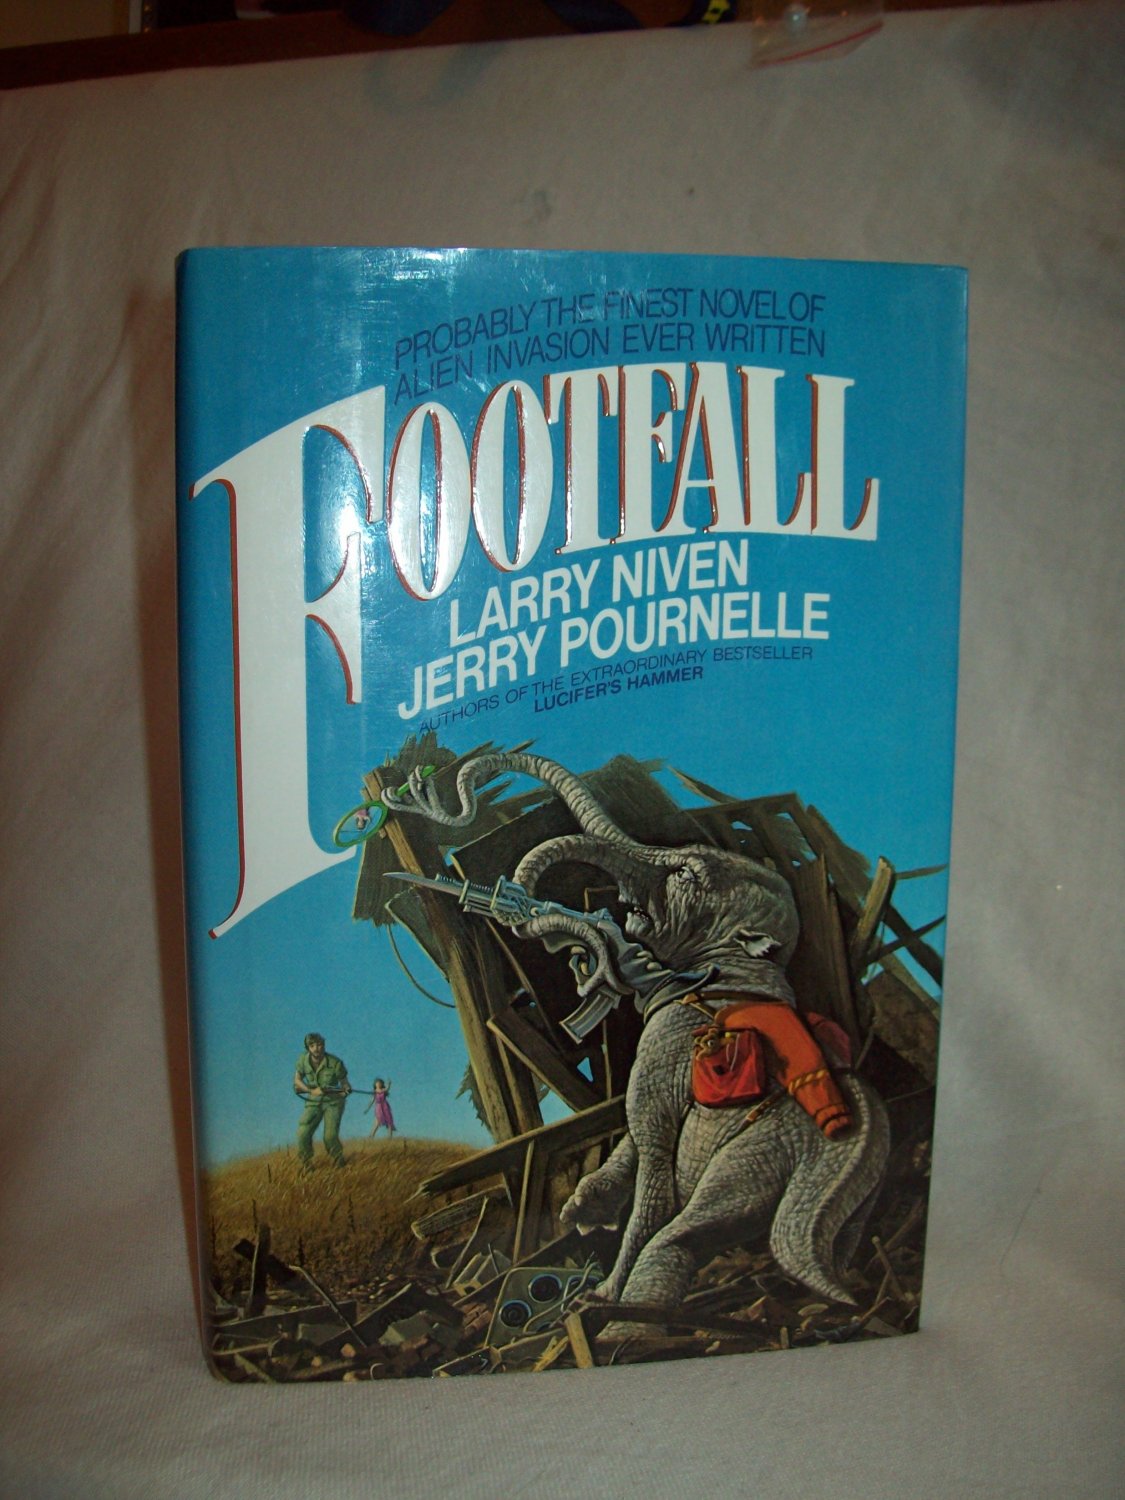 Footfall by Larry Niven